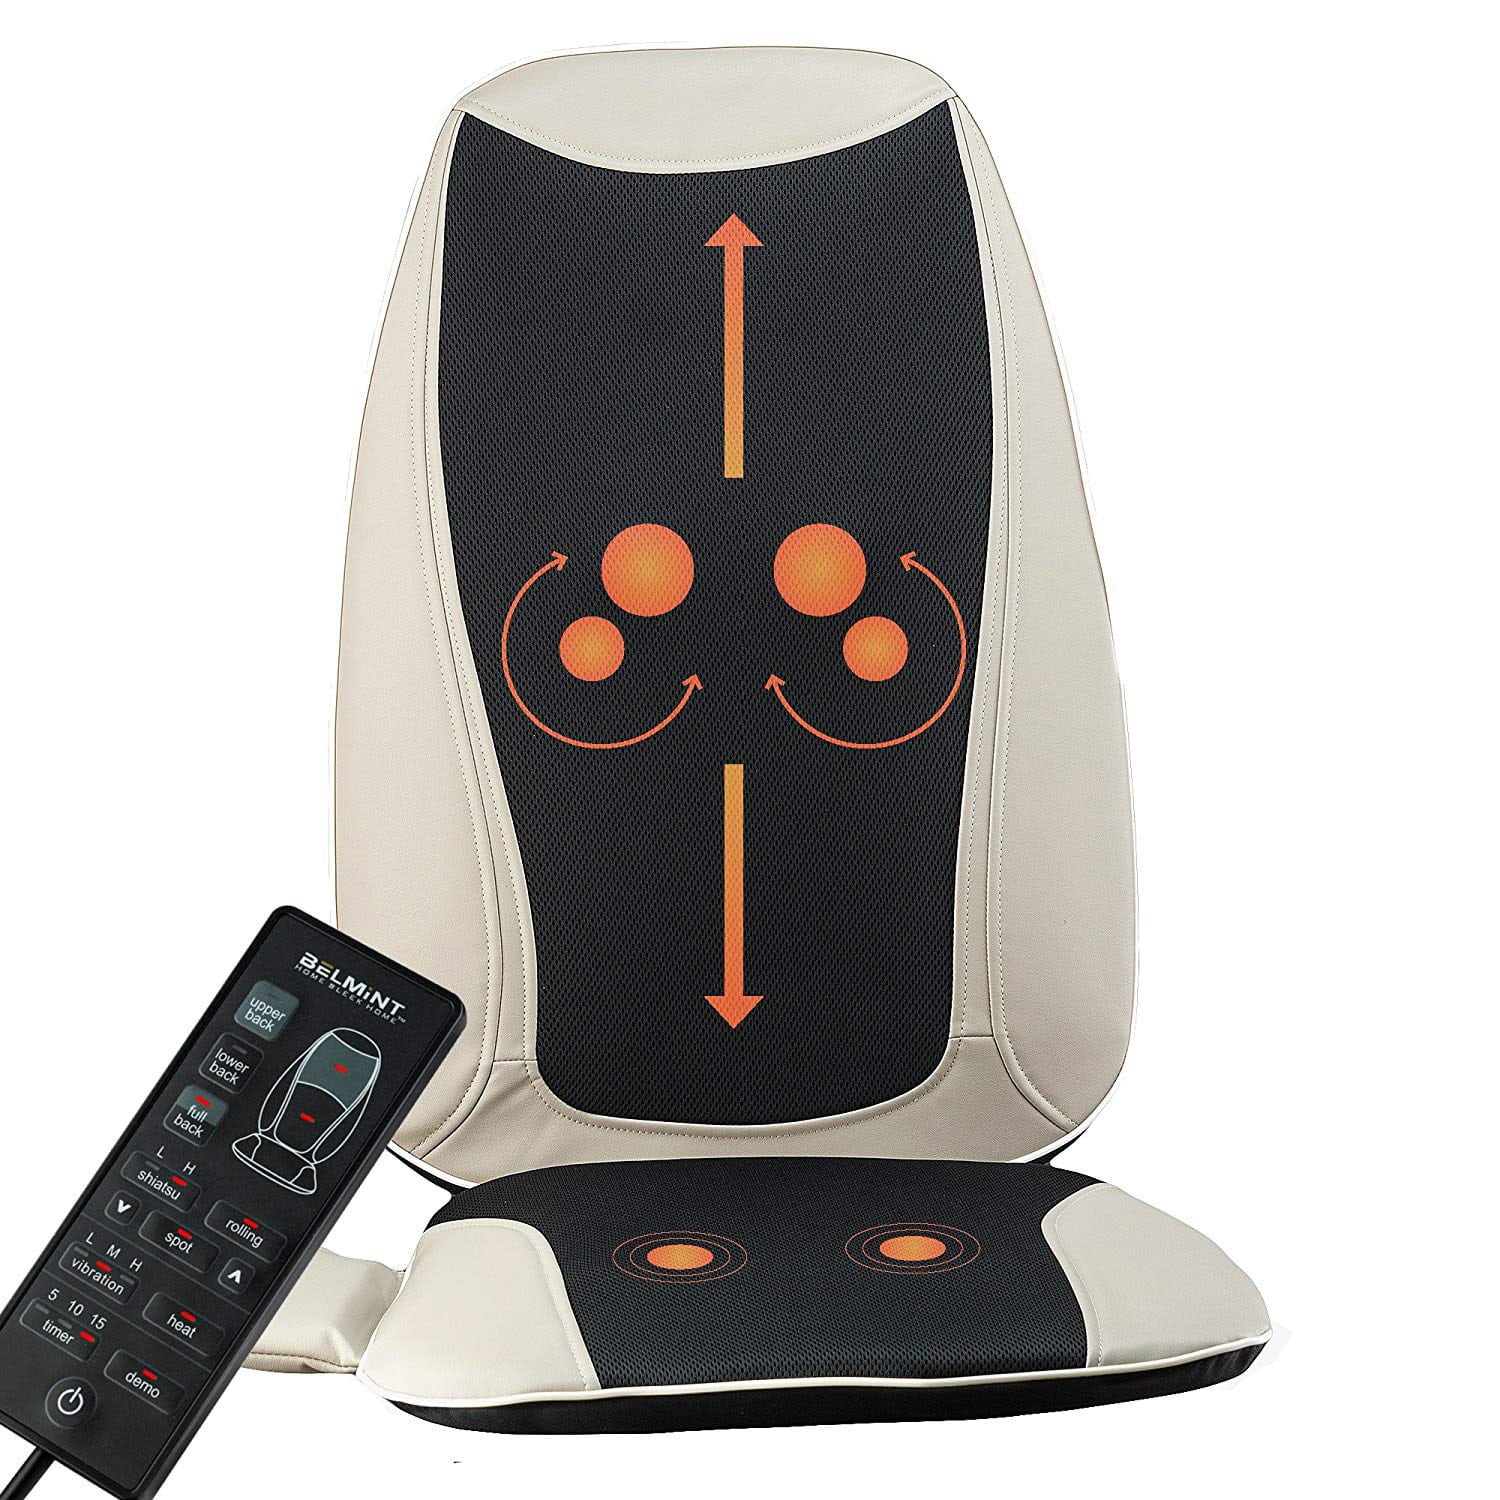 Top 10 Best Massage Chair Pads In 2022 Reviews Buyers Guide